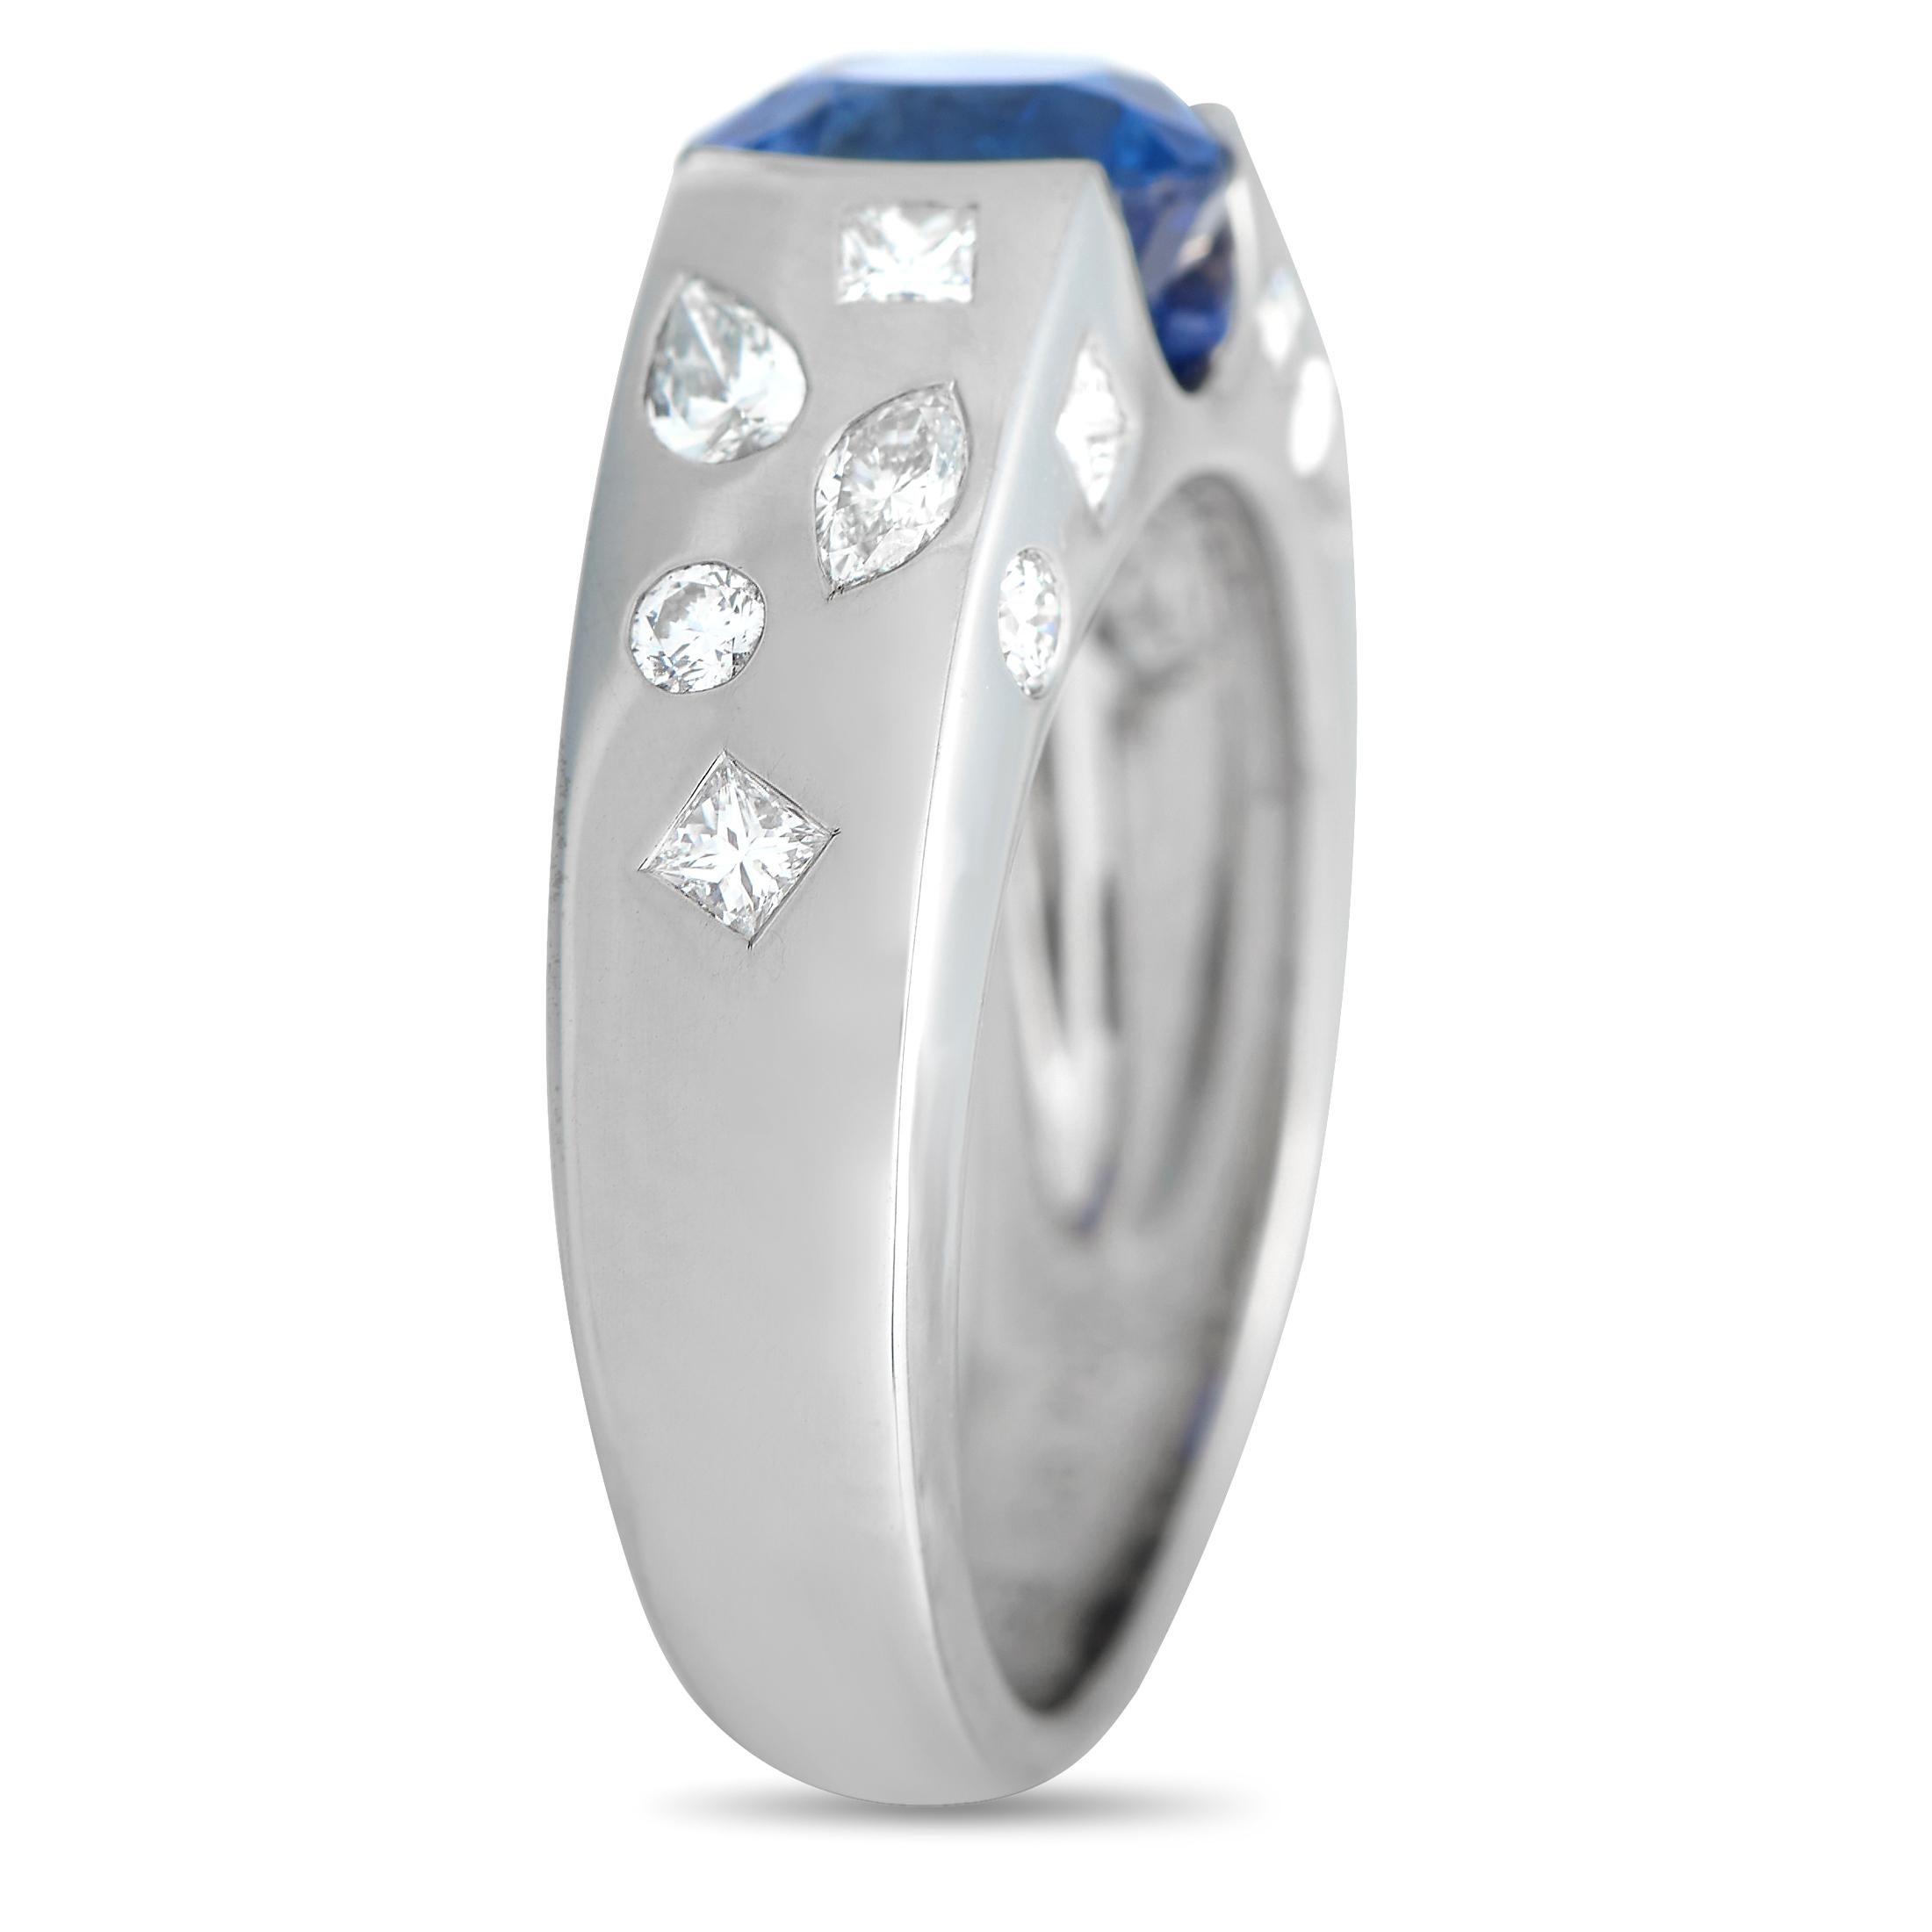 Mark a milestone or a special moment with this gorgeous modern sparkler clad in white gold. This determinedly dazzling ring from Chanel features a 2.25 ct oval sapphire center stone in a half-bezel setting. The band's shoulders are decorated with